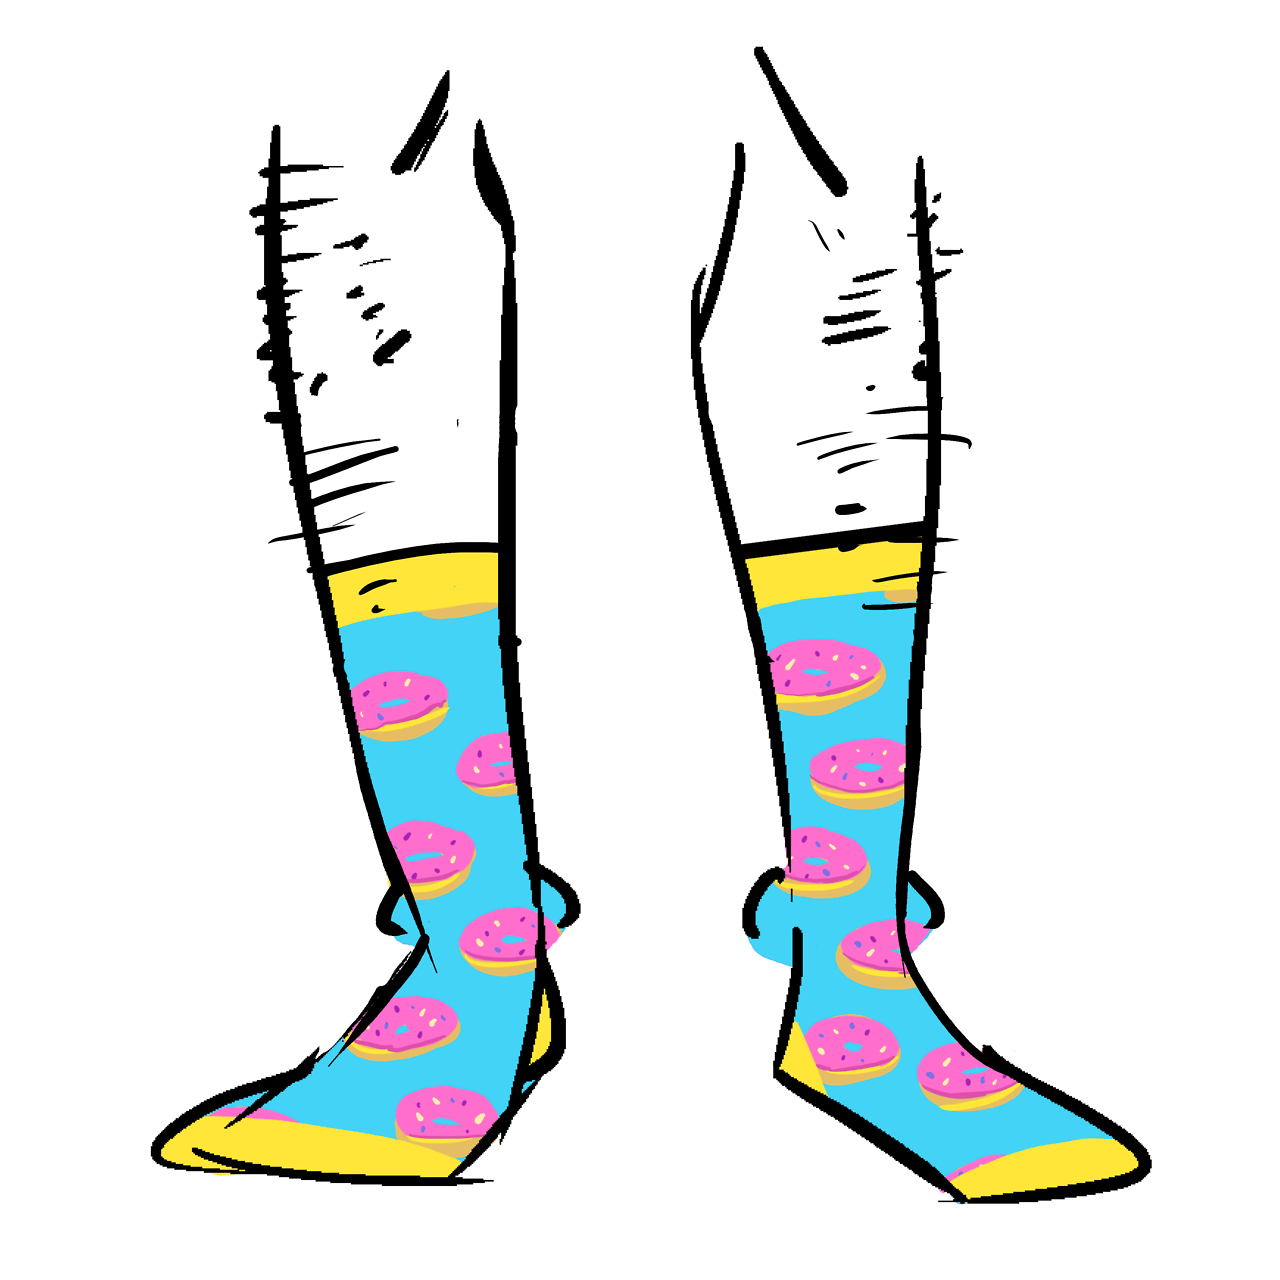 Blue and yellow socks with a pattern of pink frosted donuts